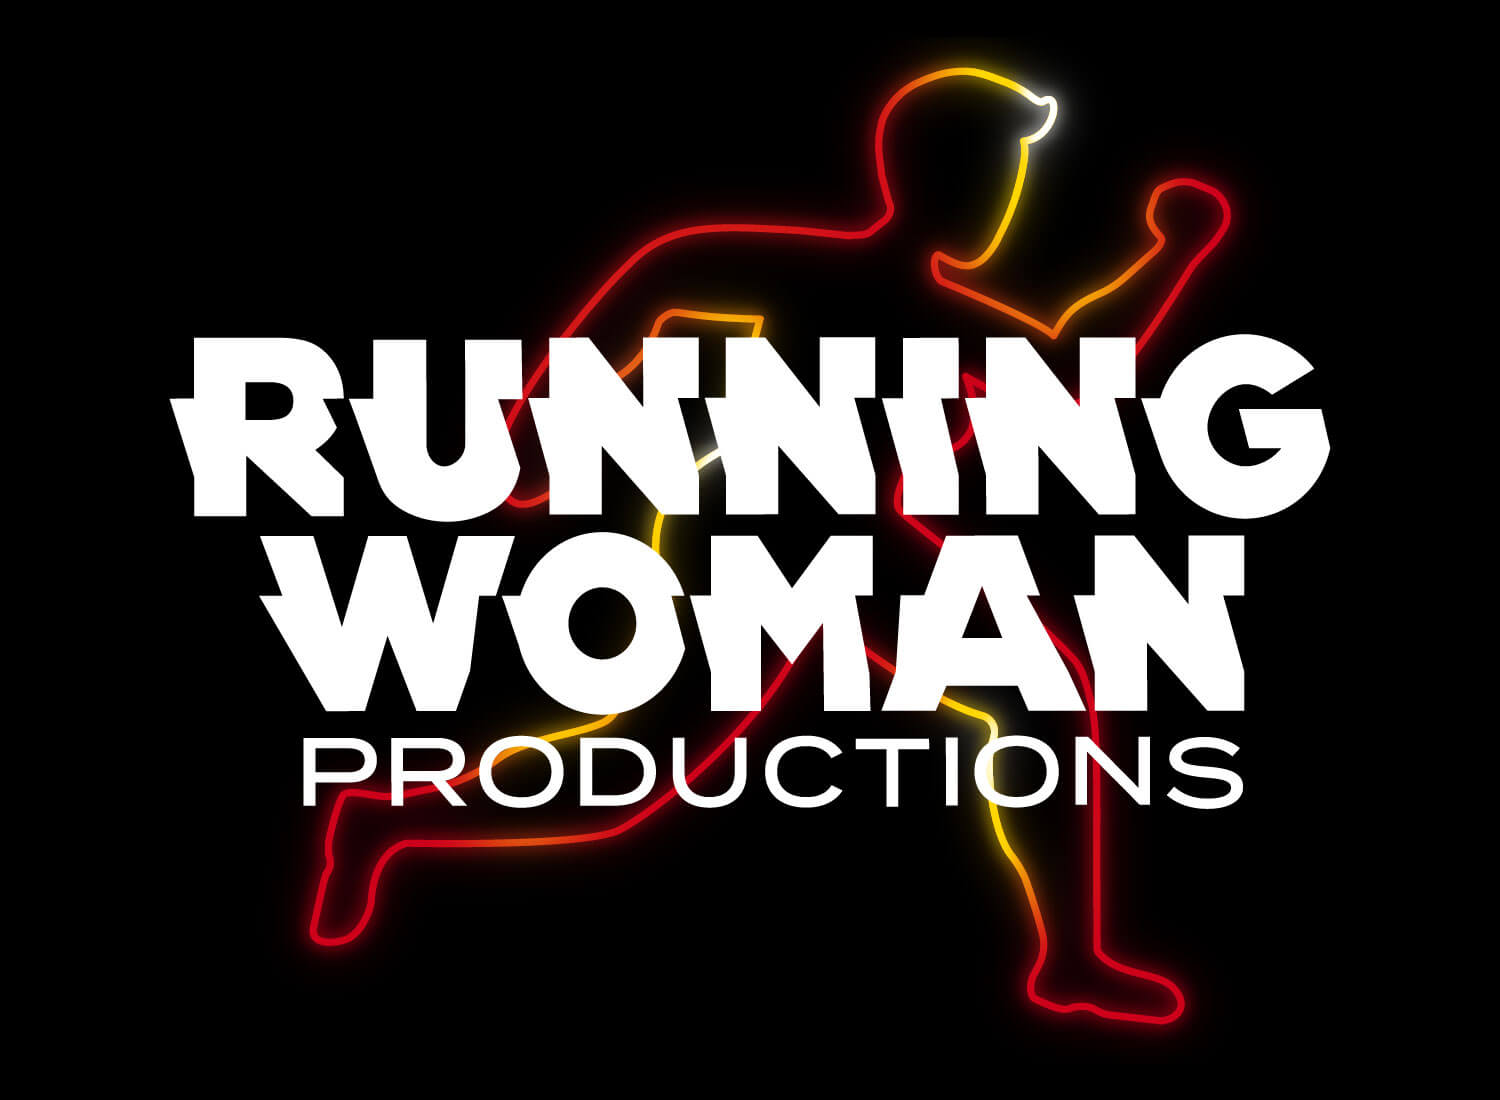 The Running Woman logo on a black background. The text Running Woman has angles making it feel like lightening. Productions is in all caps. Behind the letters a neon line drawing of a woman running, as though they are in a race.